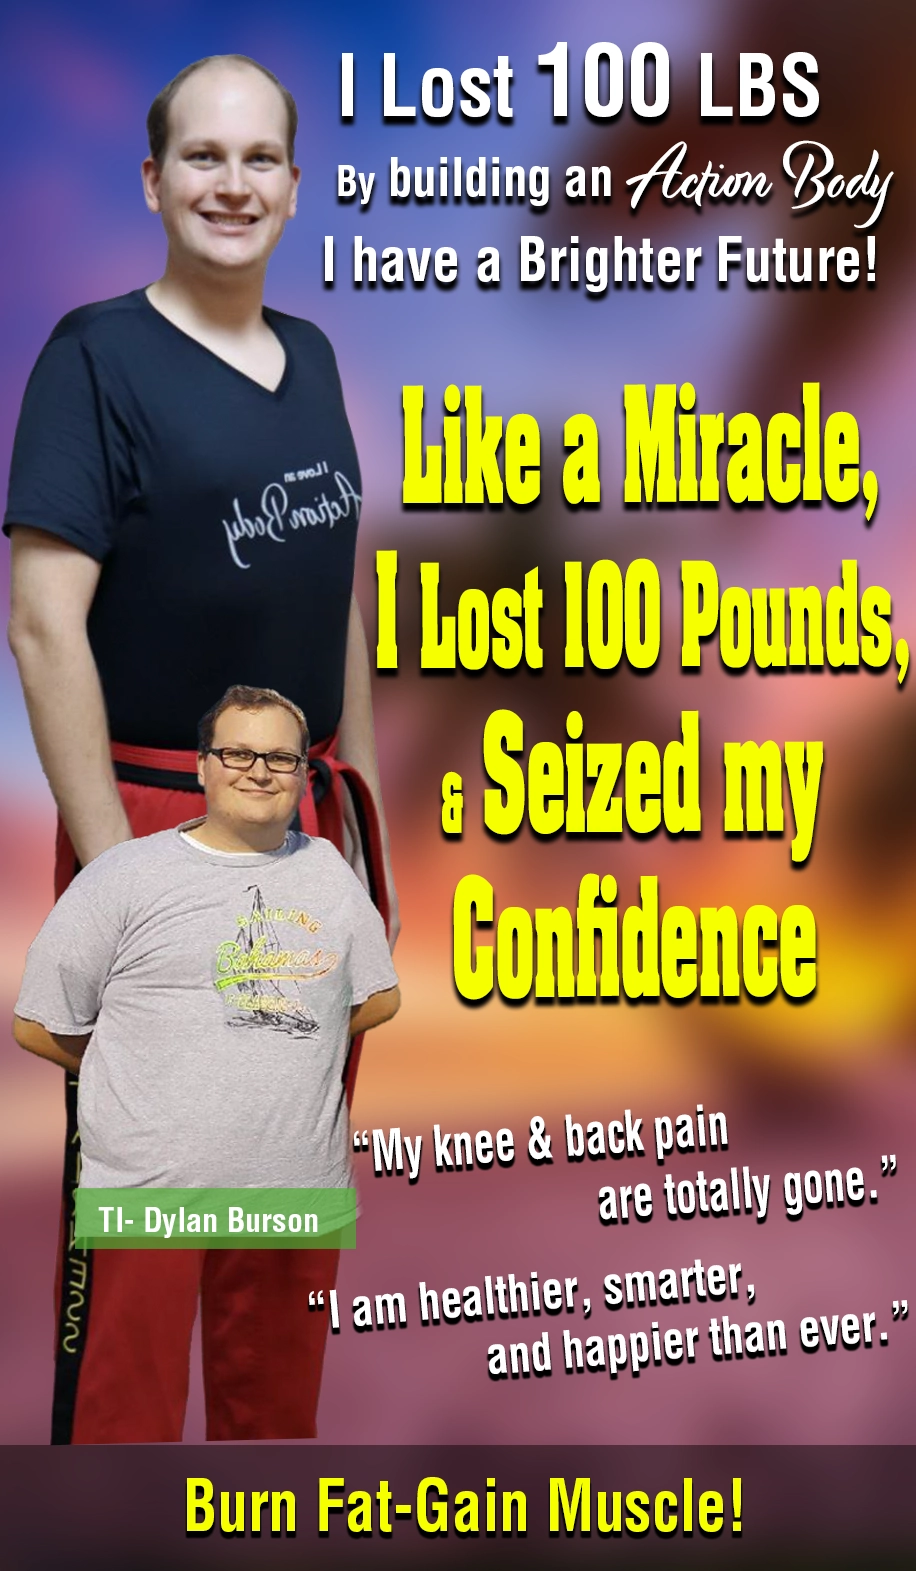 I lost 100 pounds by building an Action Body. I have a Brighter Future! Like a Miracle, I lost 100 Pounds and seized my confidence. 